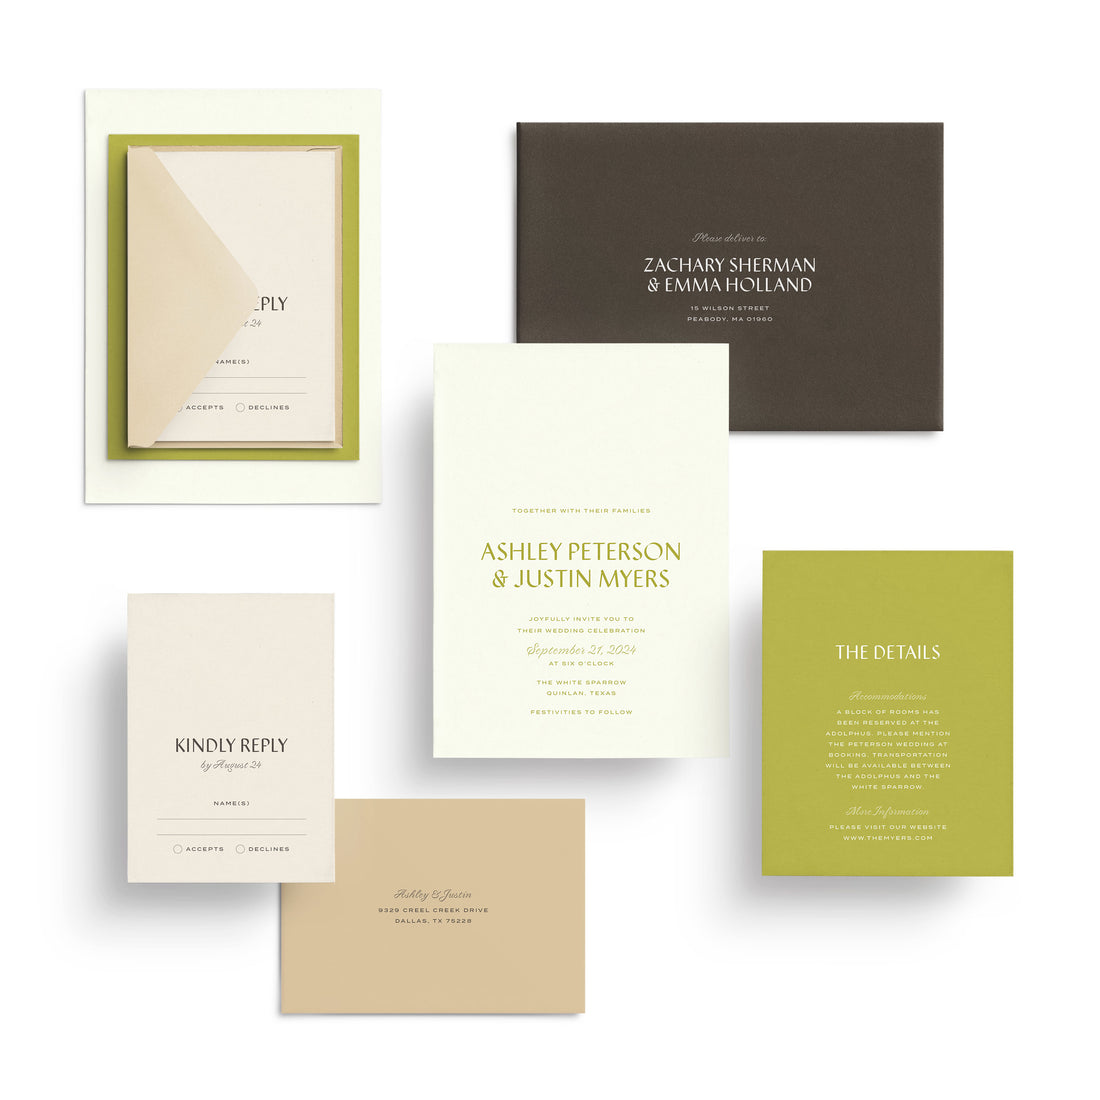 Customizable wedding invitation suite inspired by Dallas, Texas.